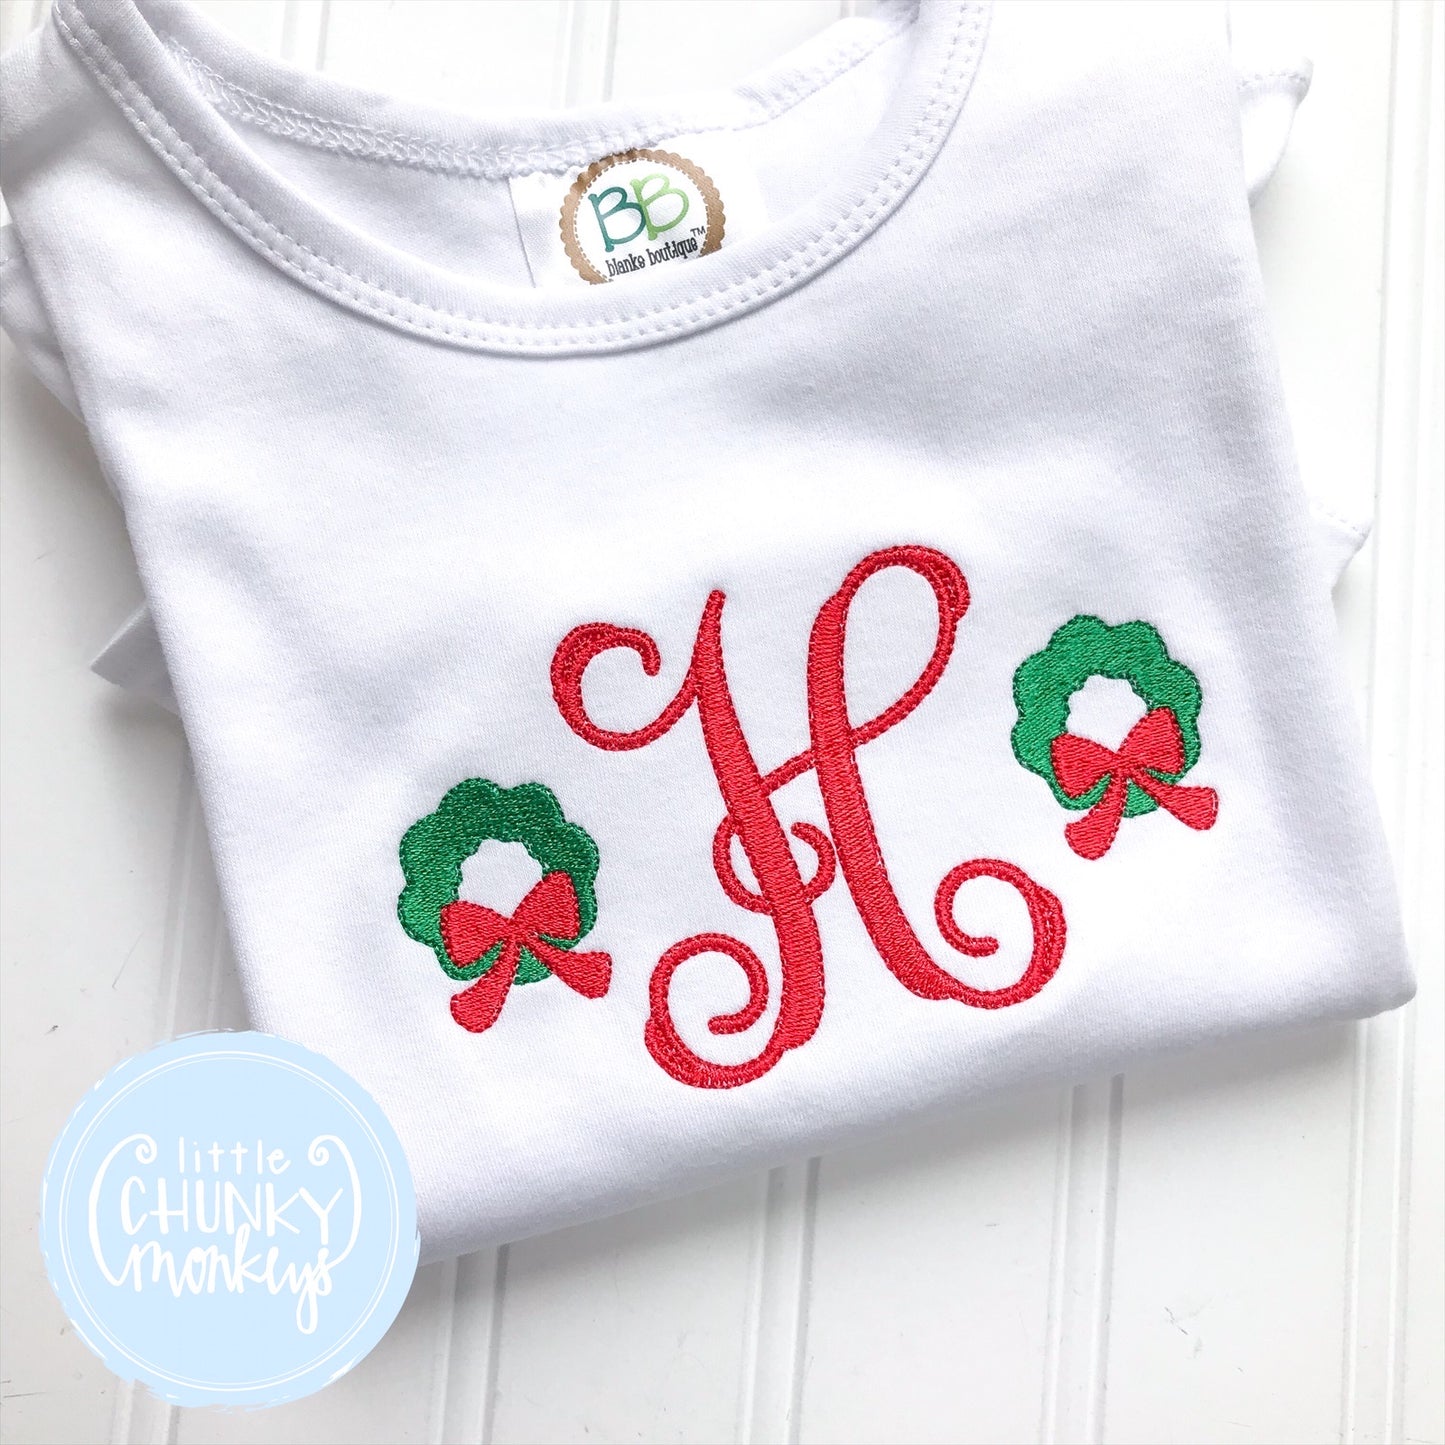 Girl Shirt - Stitched Name or Middle Initial with Mini Wreaths